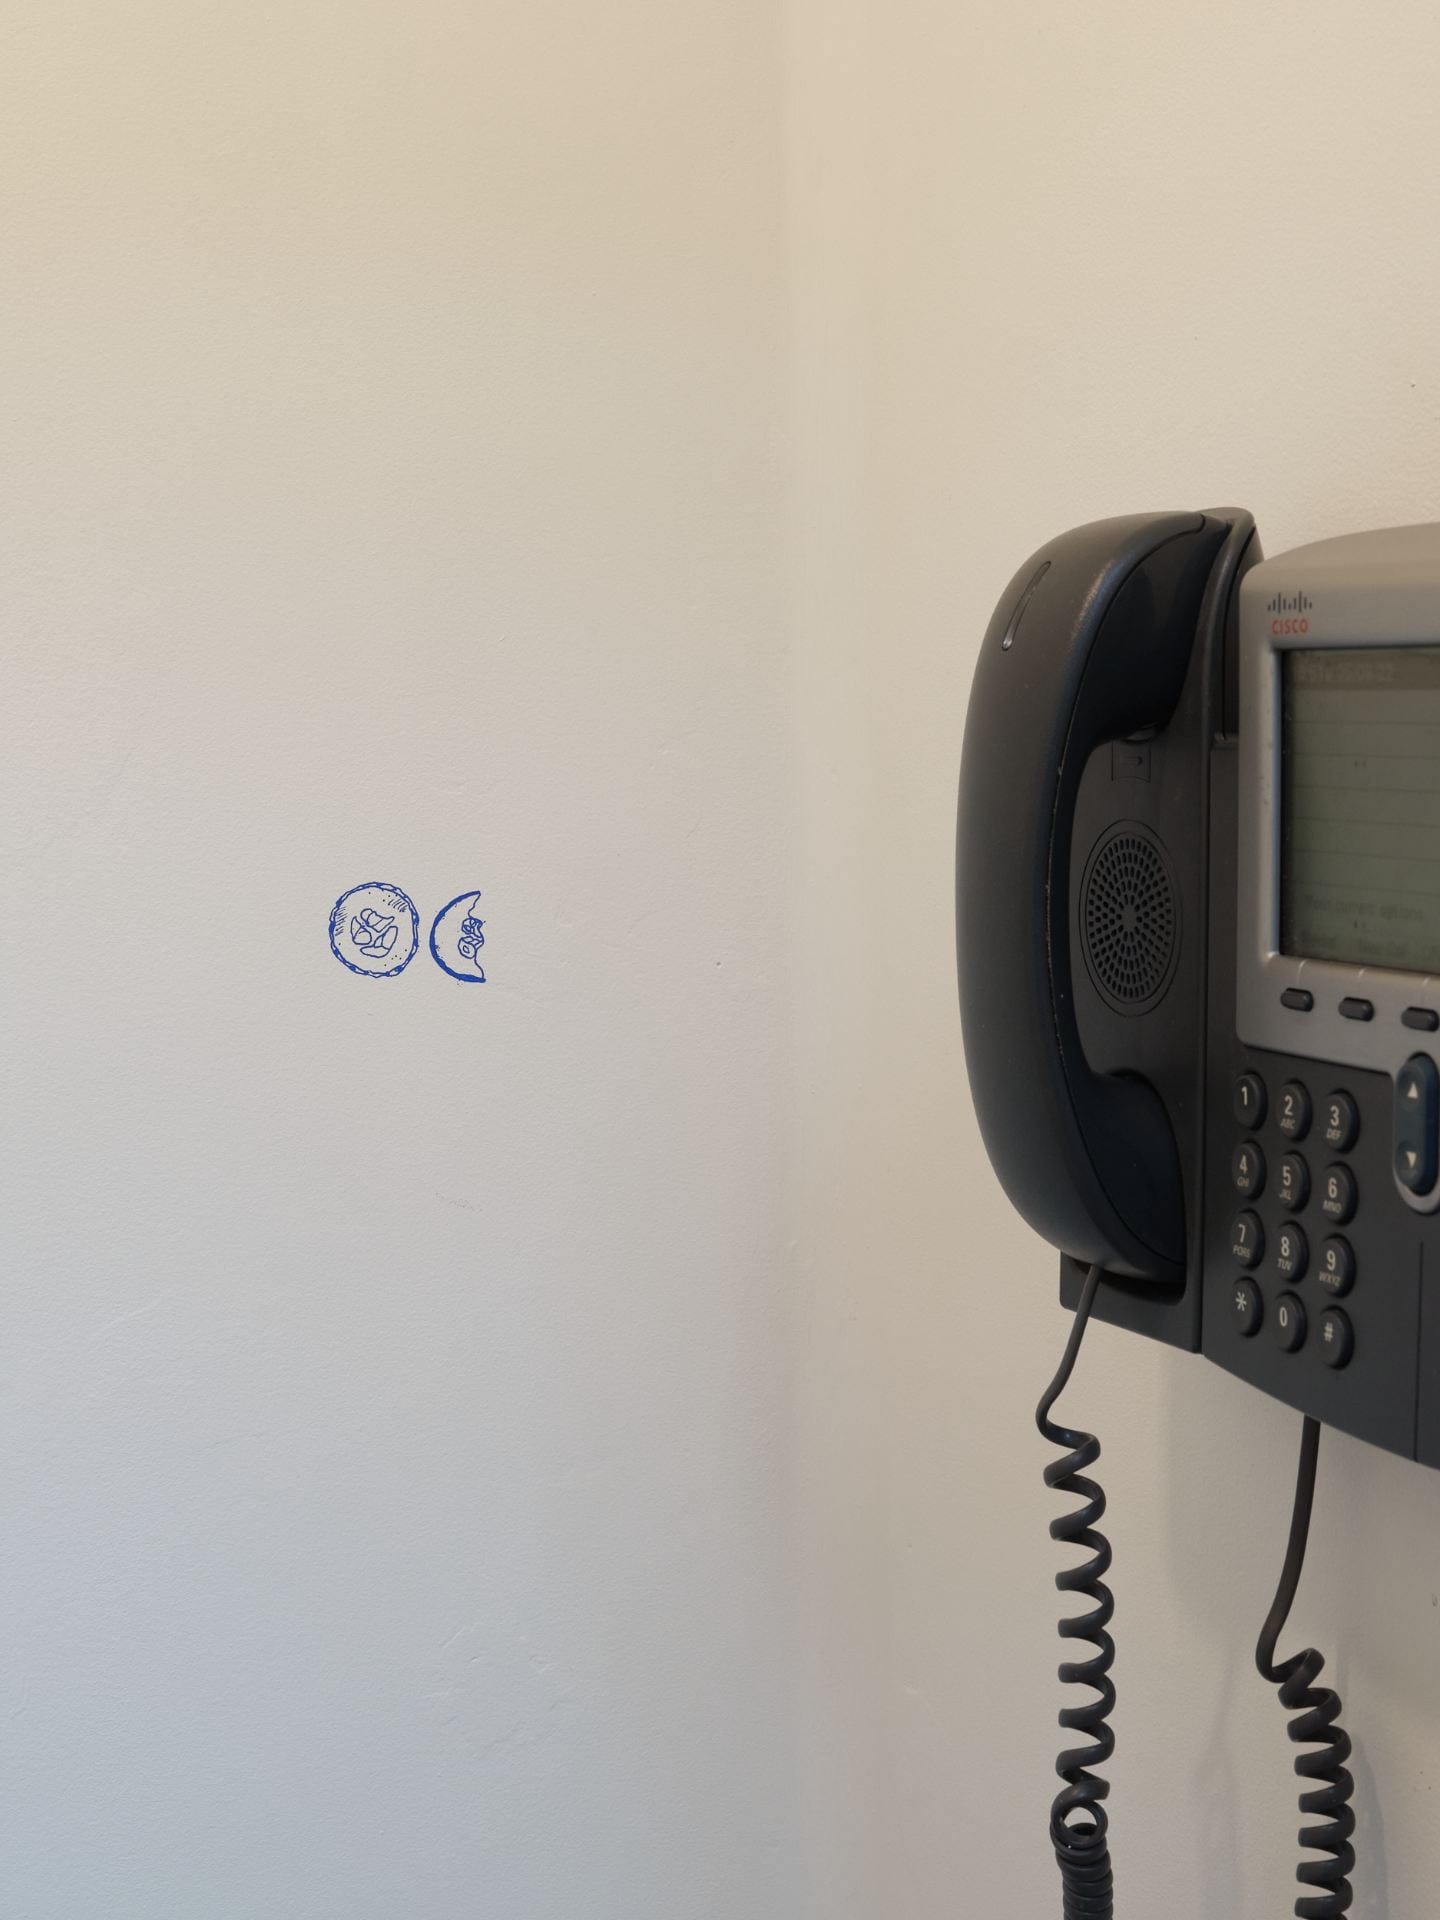 A wall mounted phone in the phone booth. To its right is a little sketch of cucumber slices.